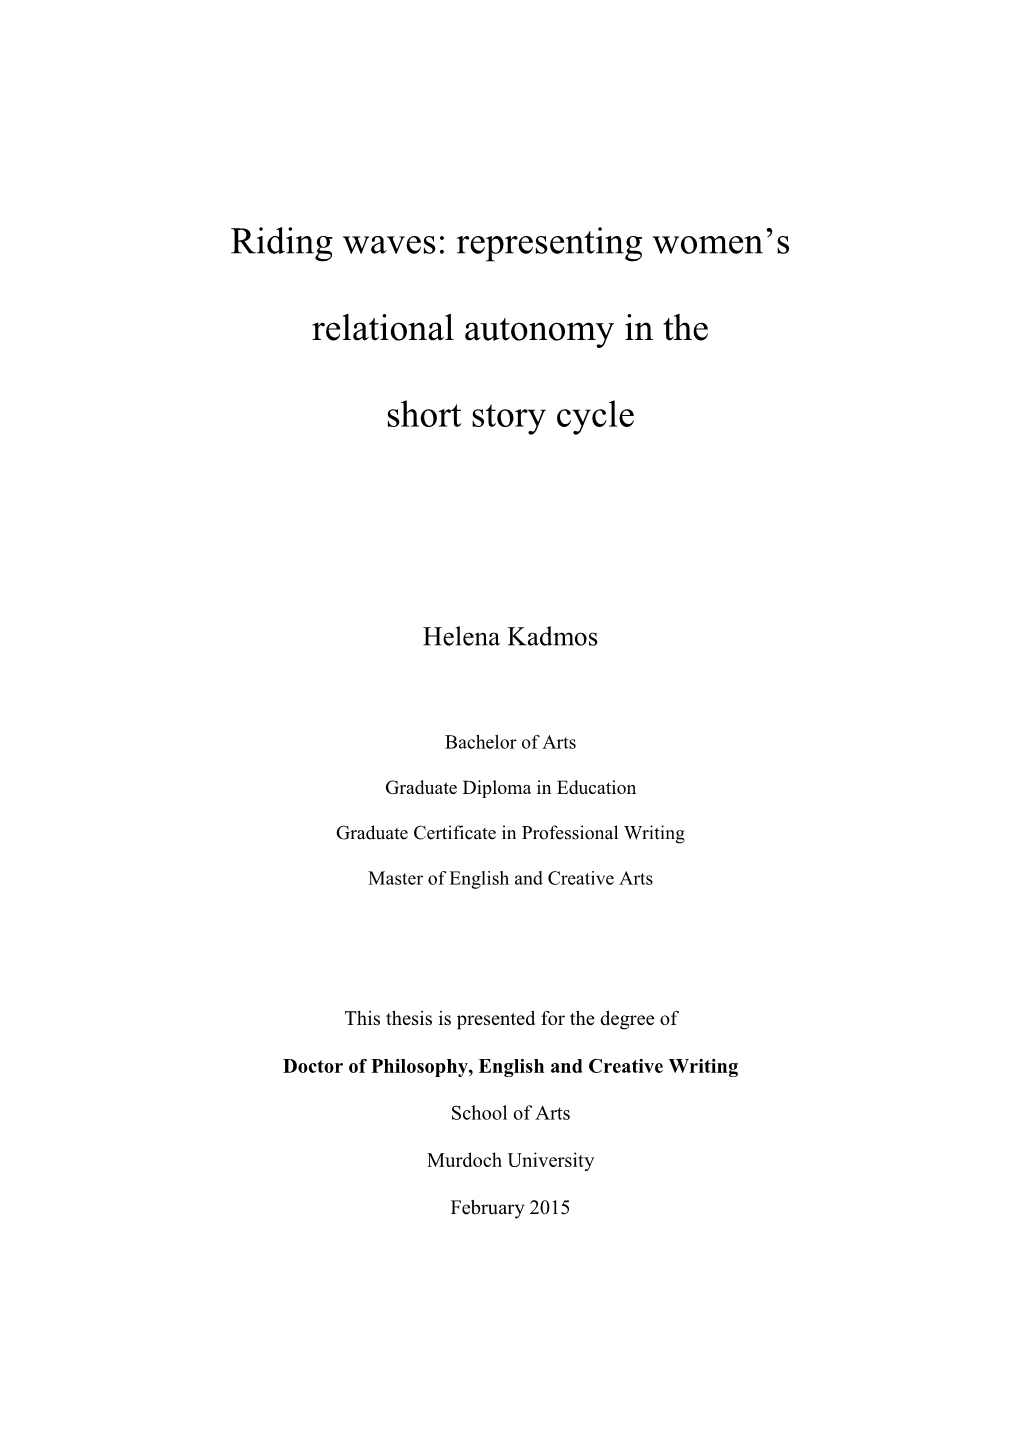 Representing Women's Relational Autonomy in the Short Story Cycle